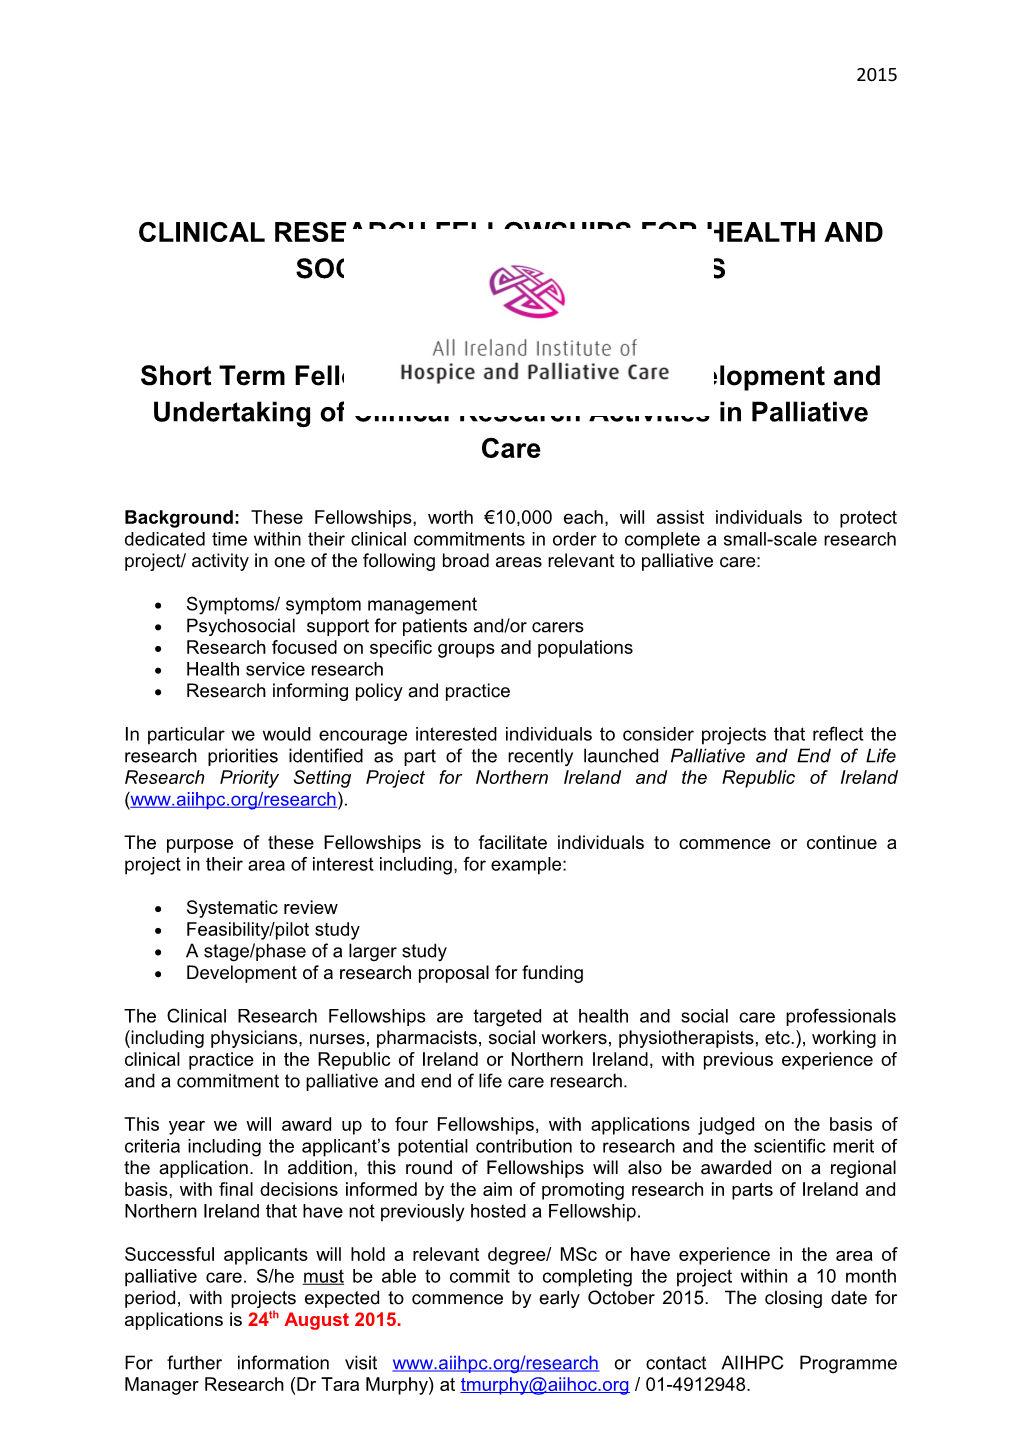 Clinical Research Fellowships for Health and Social Care Professionals